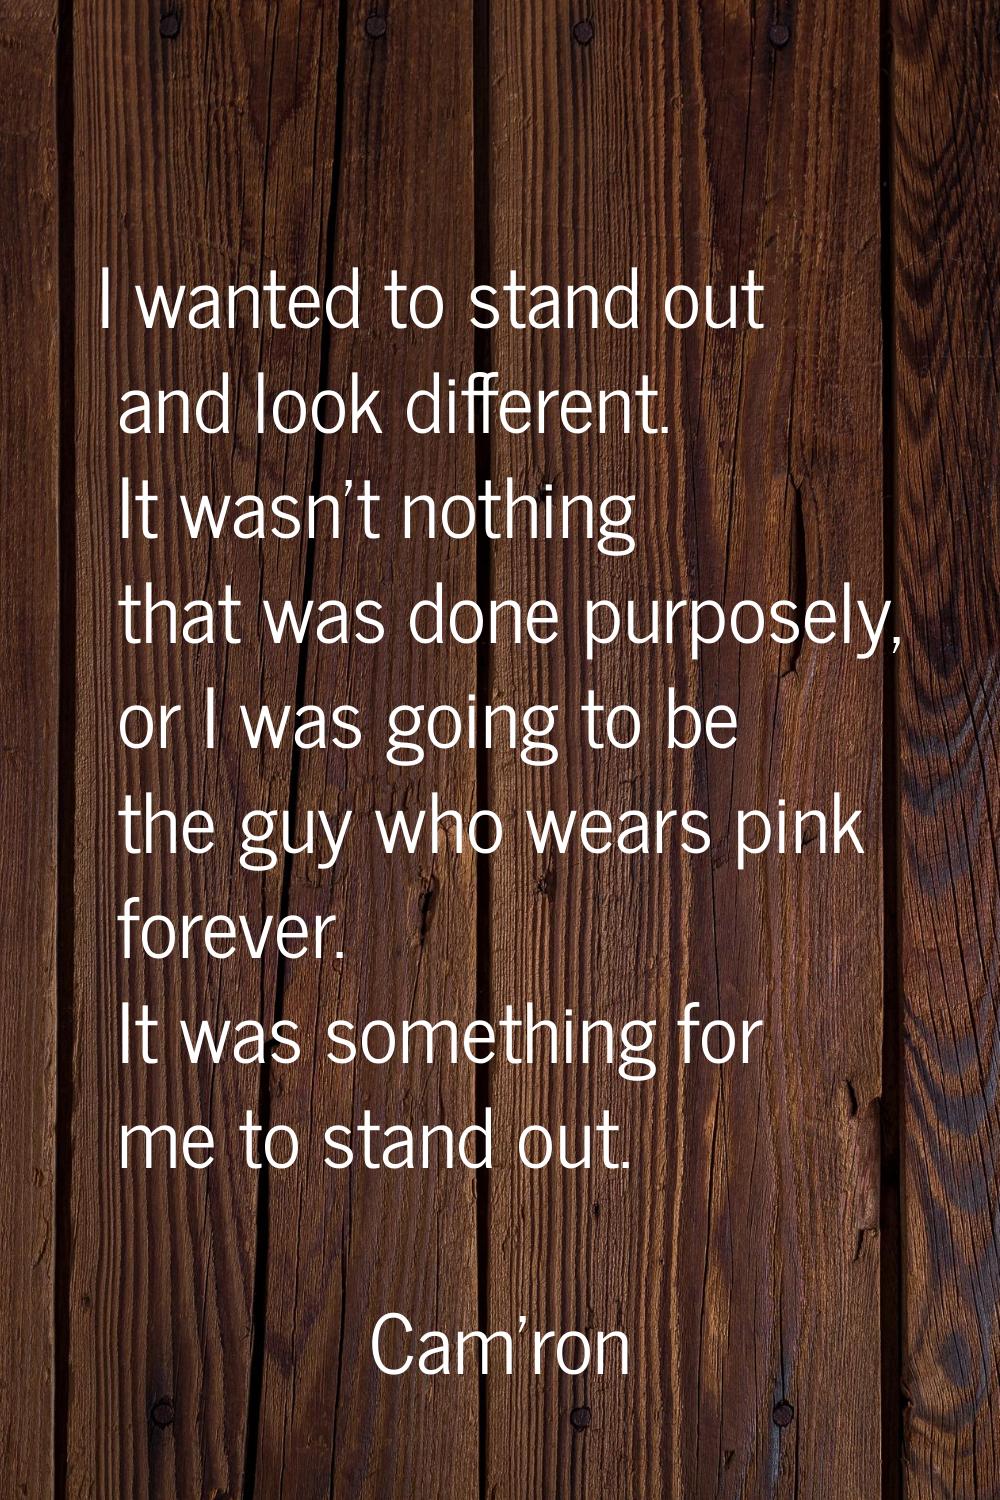 I wanted to stand out and look different. It wasn't nothing that was done purposely, or I was going